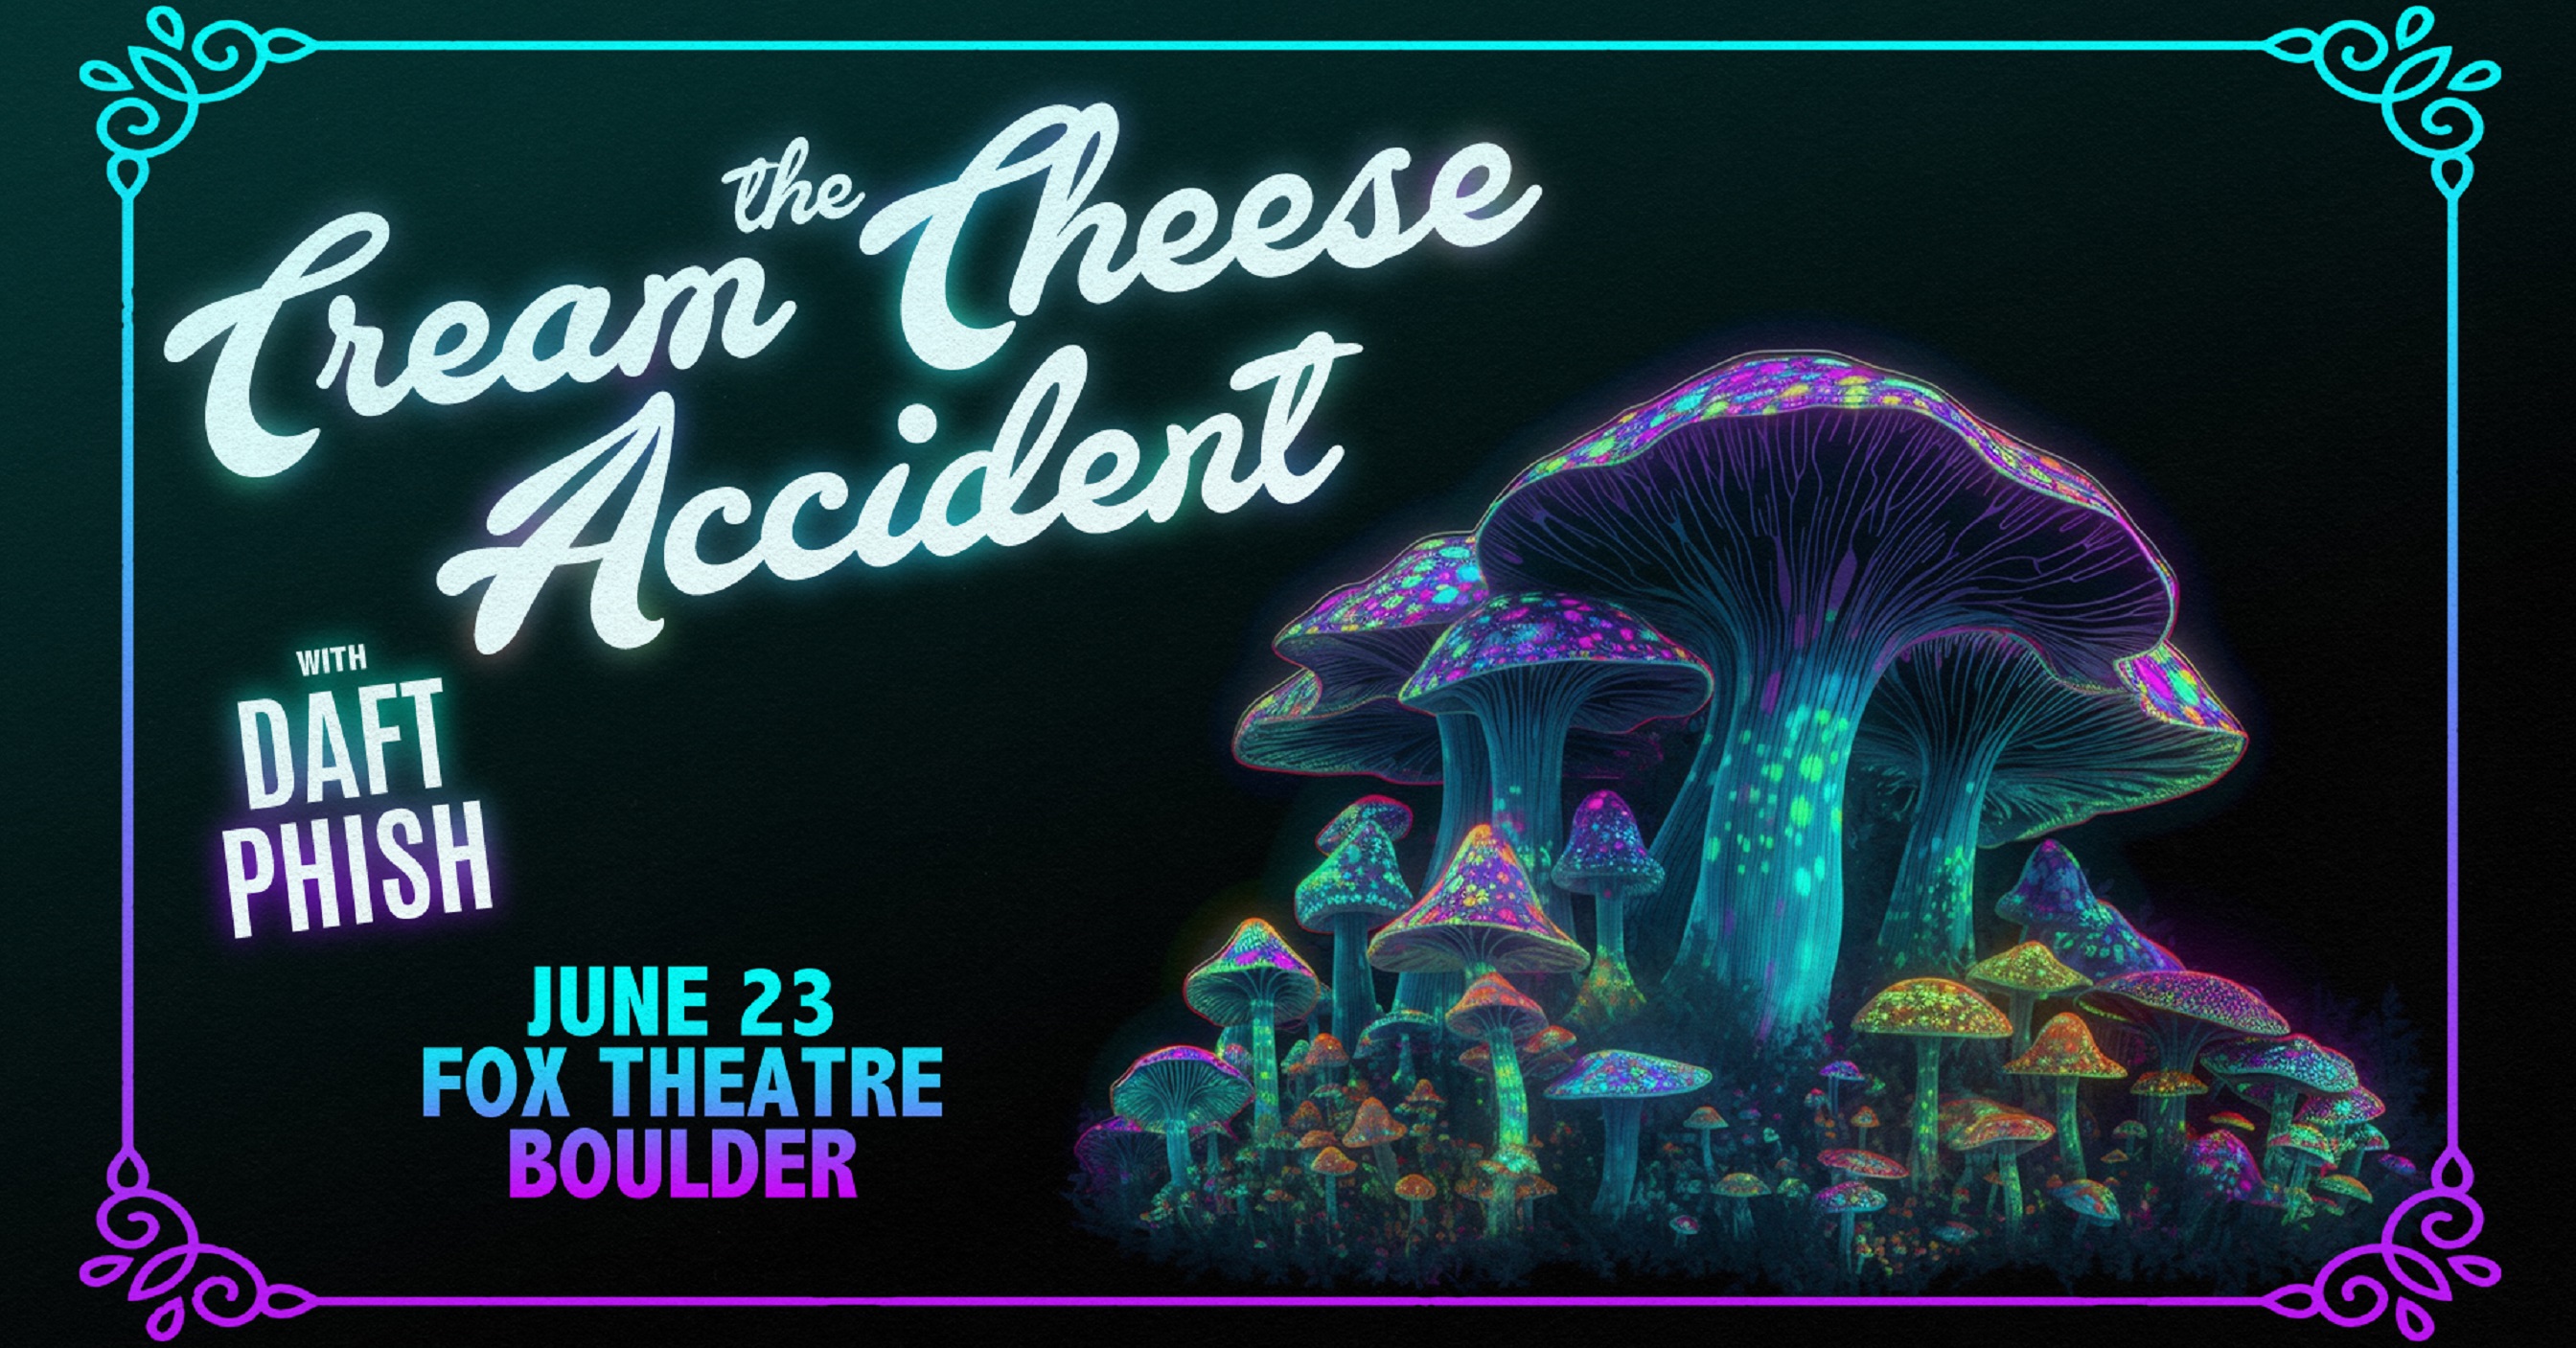 The Cream Cheese Accident schedules Fox Theatre show | 6/23/23